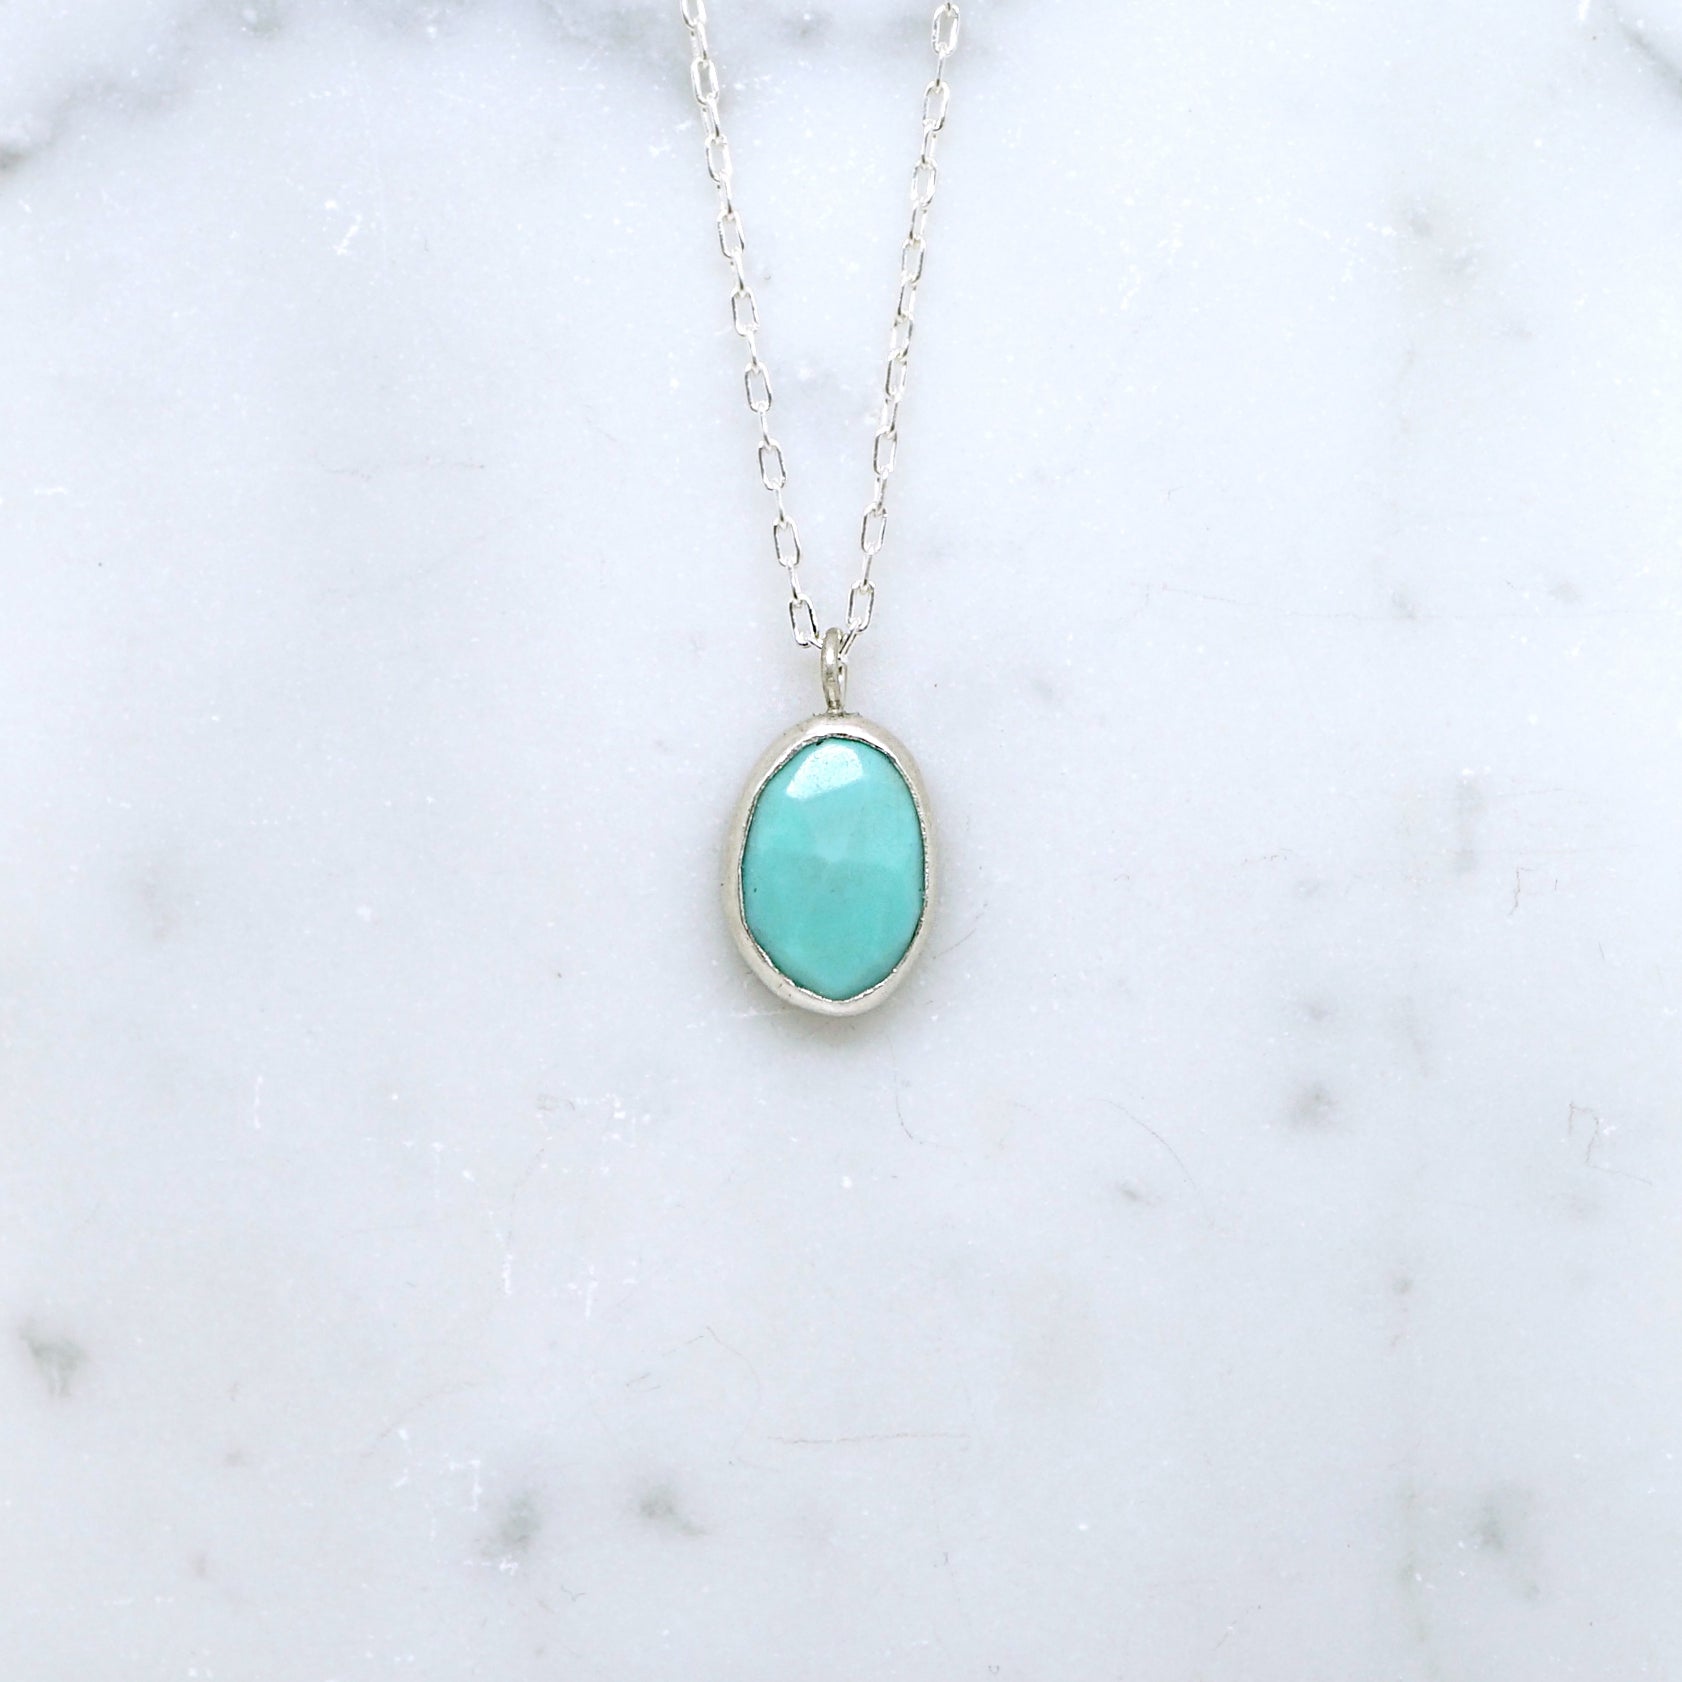 Simple turquoise pendant necklace